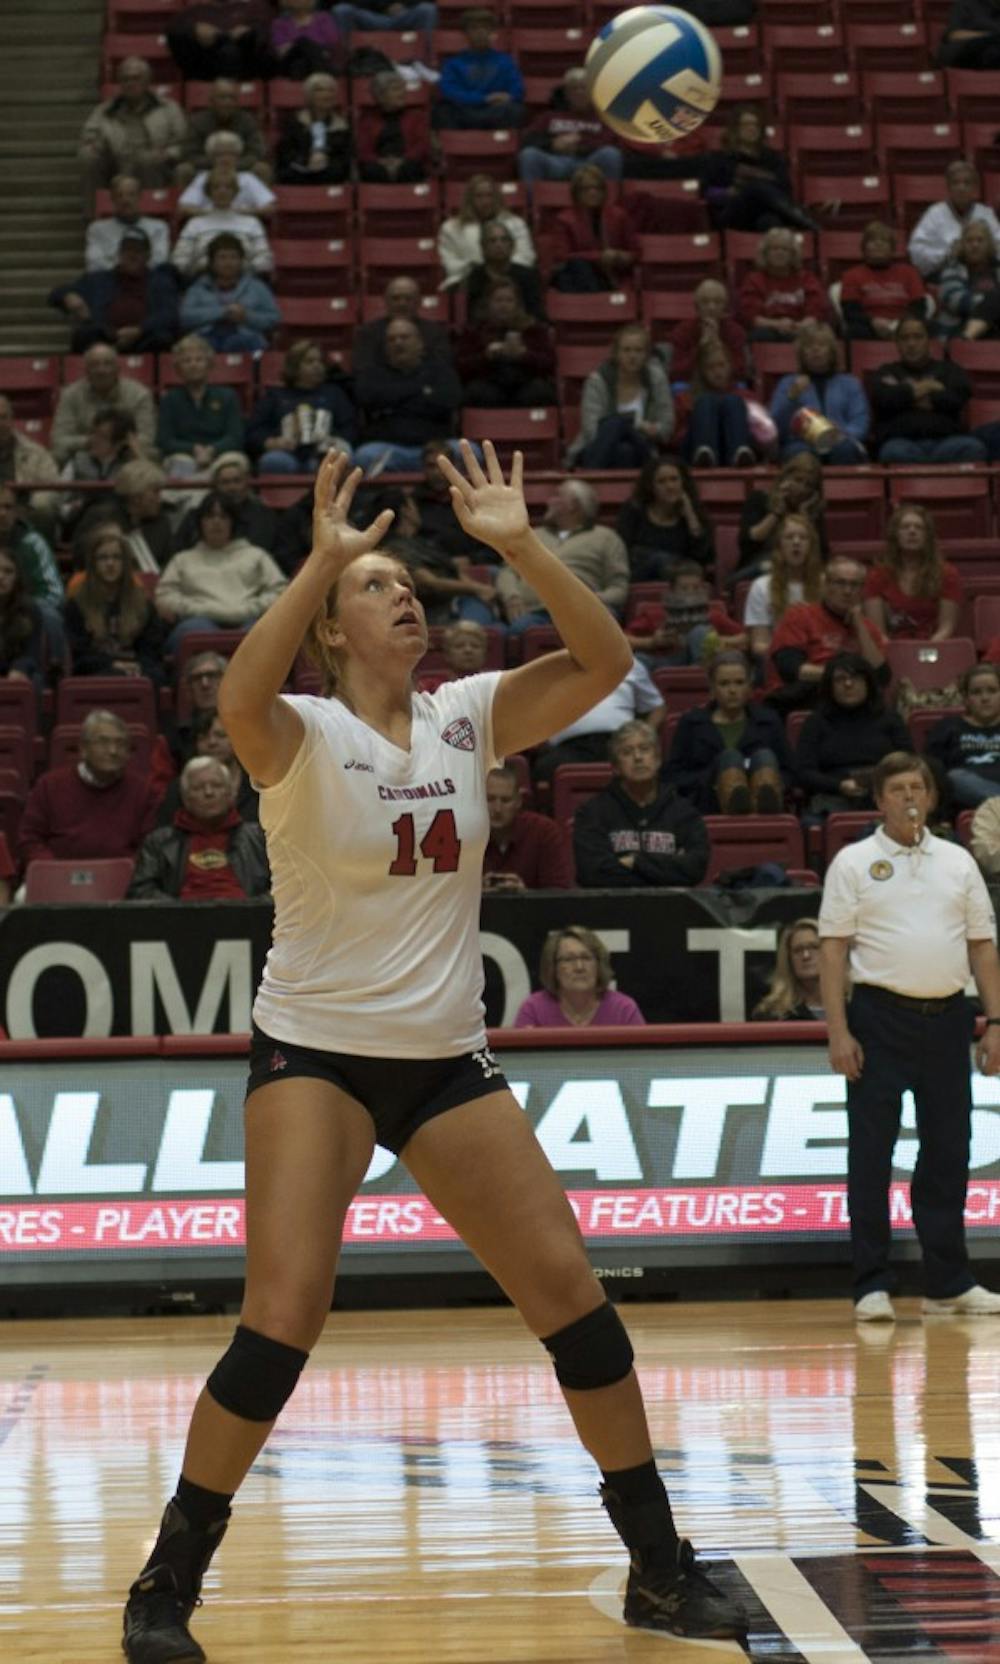 Sophomore middle hitter Kelly Hopkins prepares to set the ball against Bowling Green State University on Oct. 25 at Worthen Arena. Hopkins had two digs in the match. DN PHOTO MATT McKINNEY